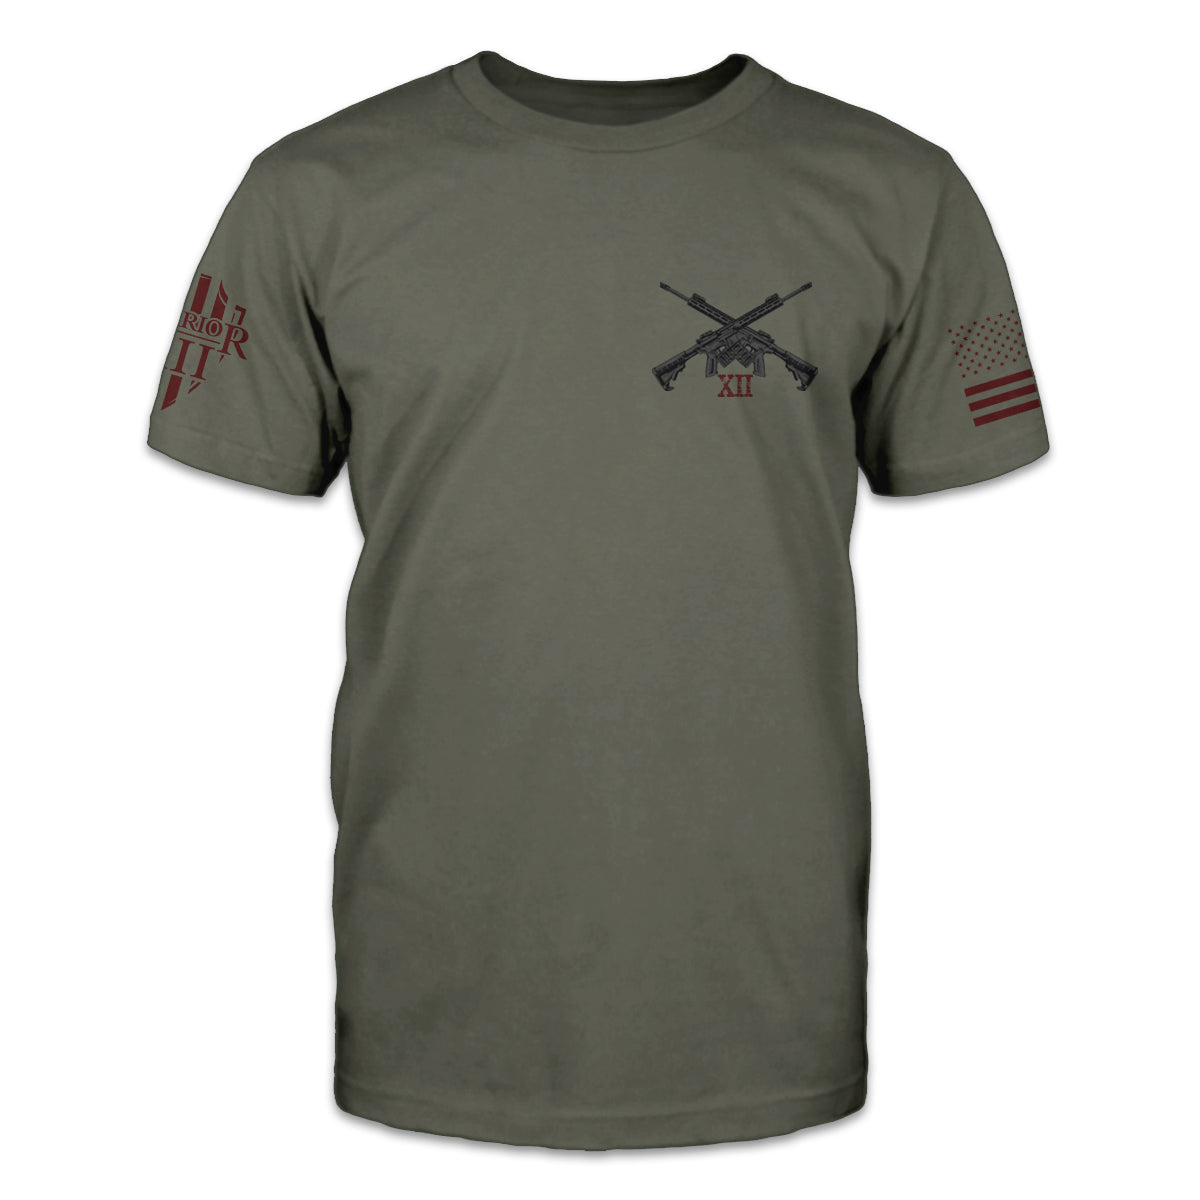 Military Green t-shirt, front picture of t-shirt with a left chest print of AR-15's in a dark grey/black.